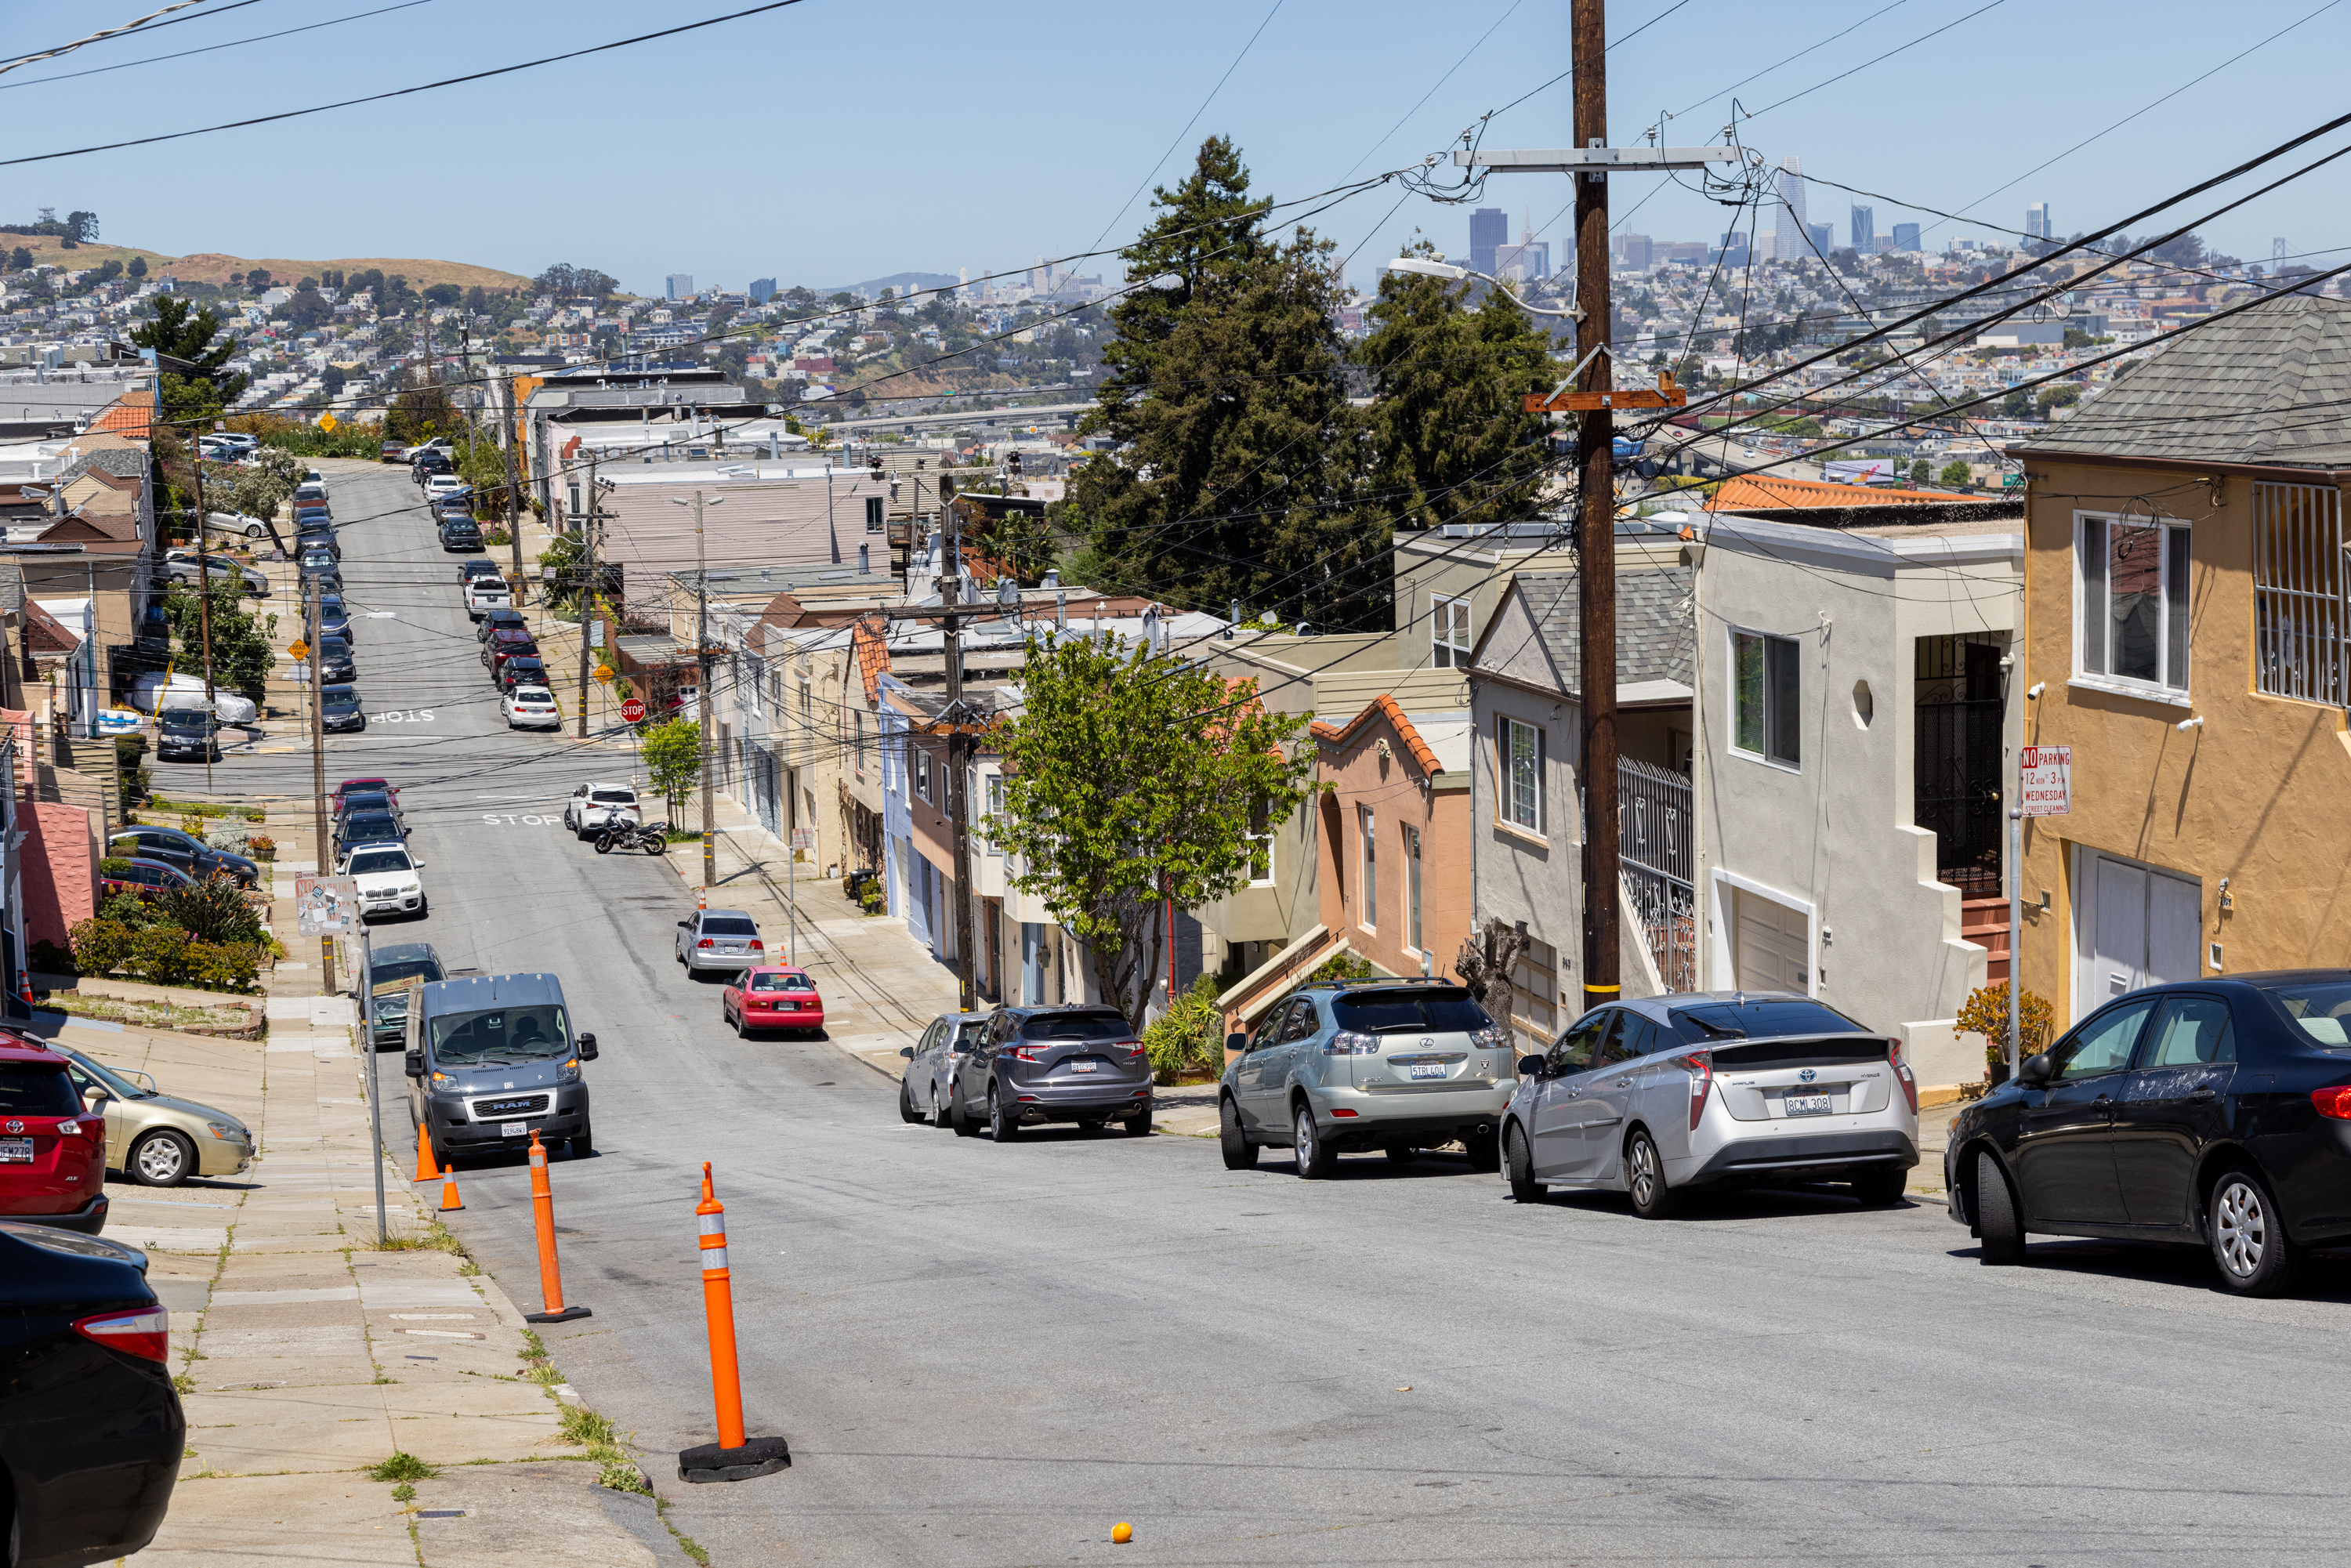 A steep street lined with parked cars and houses, with a city skyline in the distance.